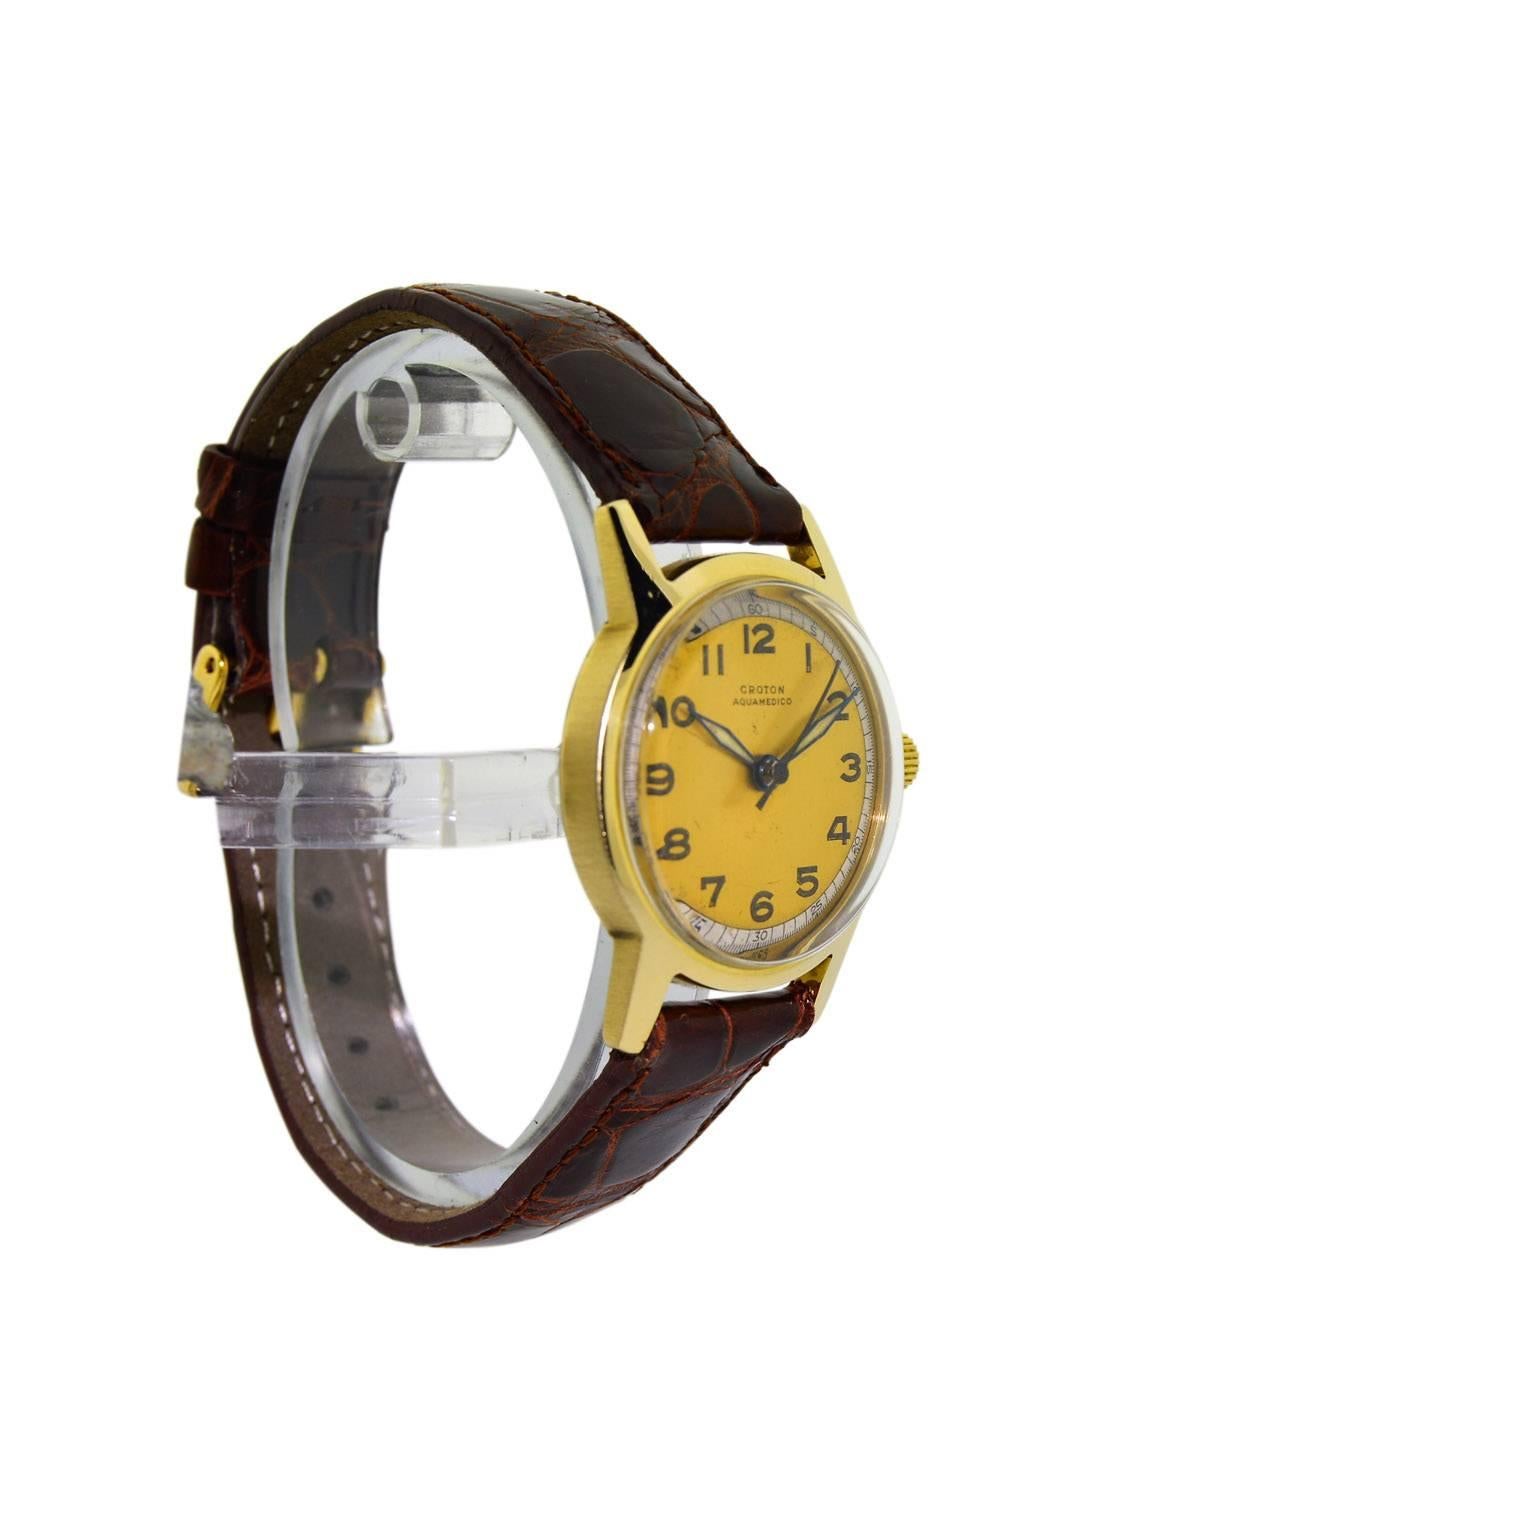 FACTORY / HOUSE: Croton Watch Company
STYLE / REFERENCE: Round / Screw Back / Aquamedico
METAL / MATERIAL: 14kt. Solid Yellow Gold
CIRCA: 1950's
DIMENSIONS: Length 37mm X Diameter 30mm
MOVEMENT / CALIBER: Manual Winding / 17 Jewels / Cal. A-3N
DIAL